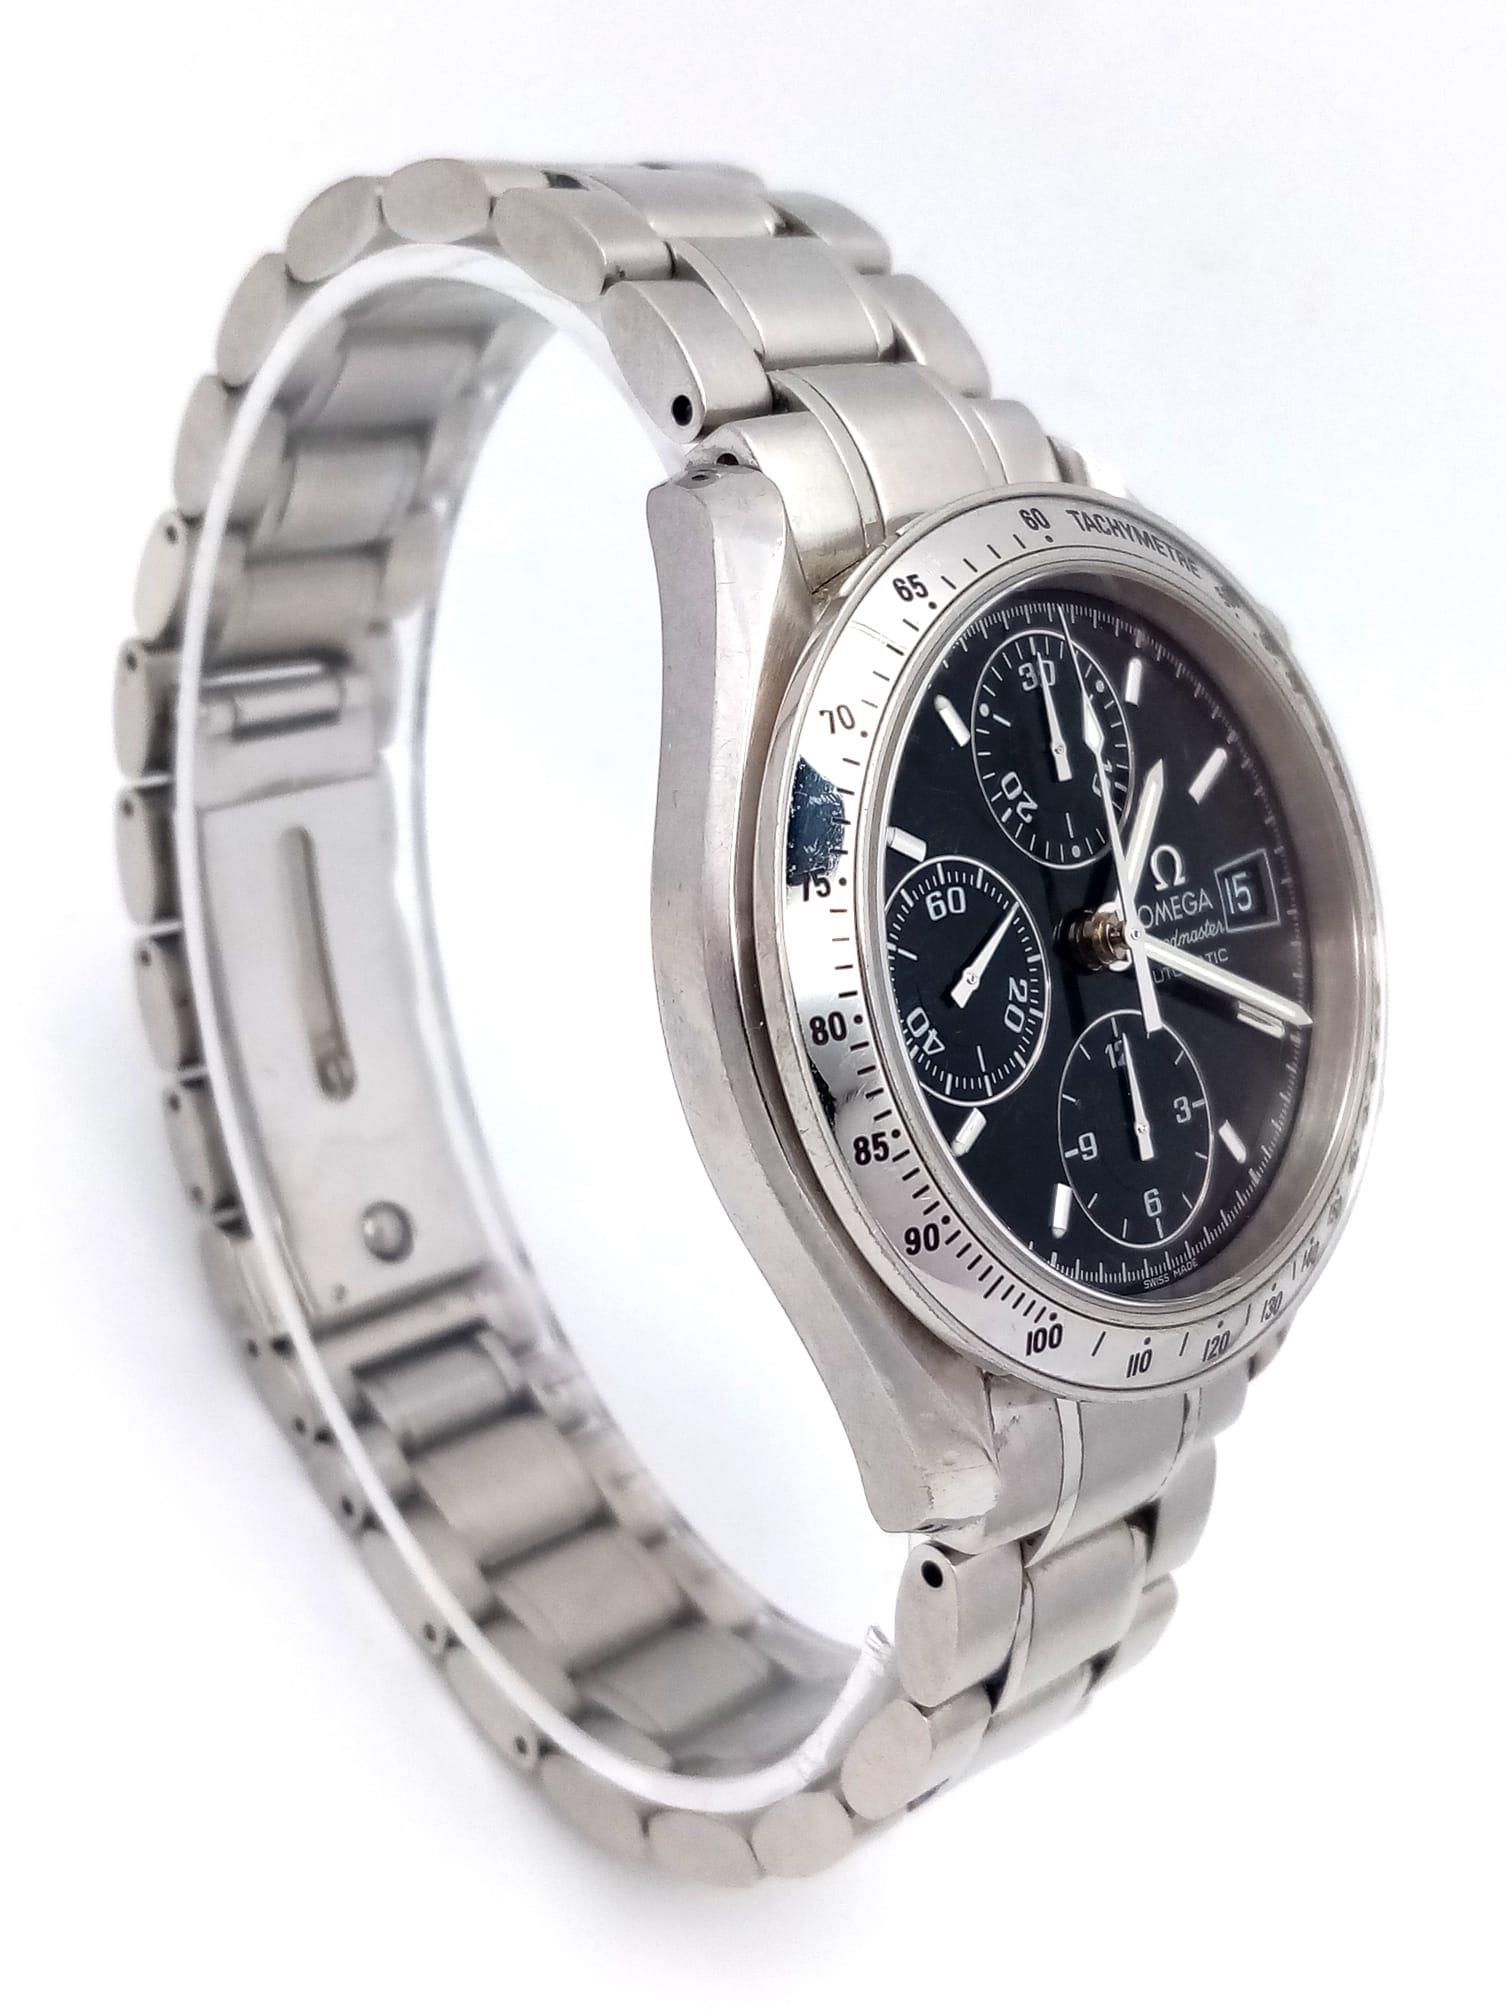 AN OMEGA "SPEEDMASTER" AUTOMATIC WATCH WITH 3 SUBDIALS , DATE BOX AND BLACK DIAL ALL SET IN - Image 4 of 9